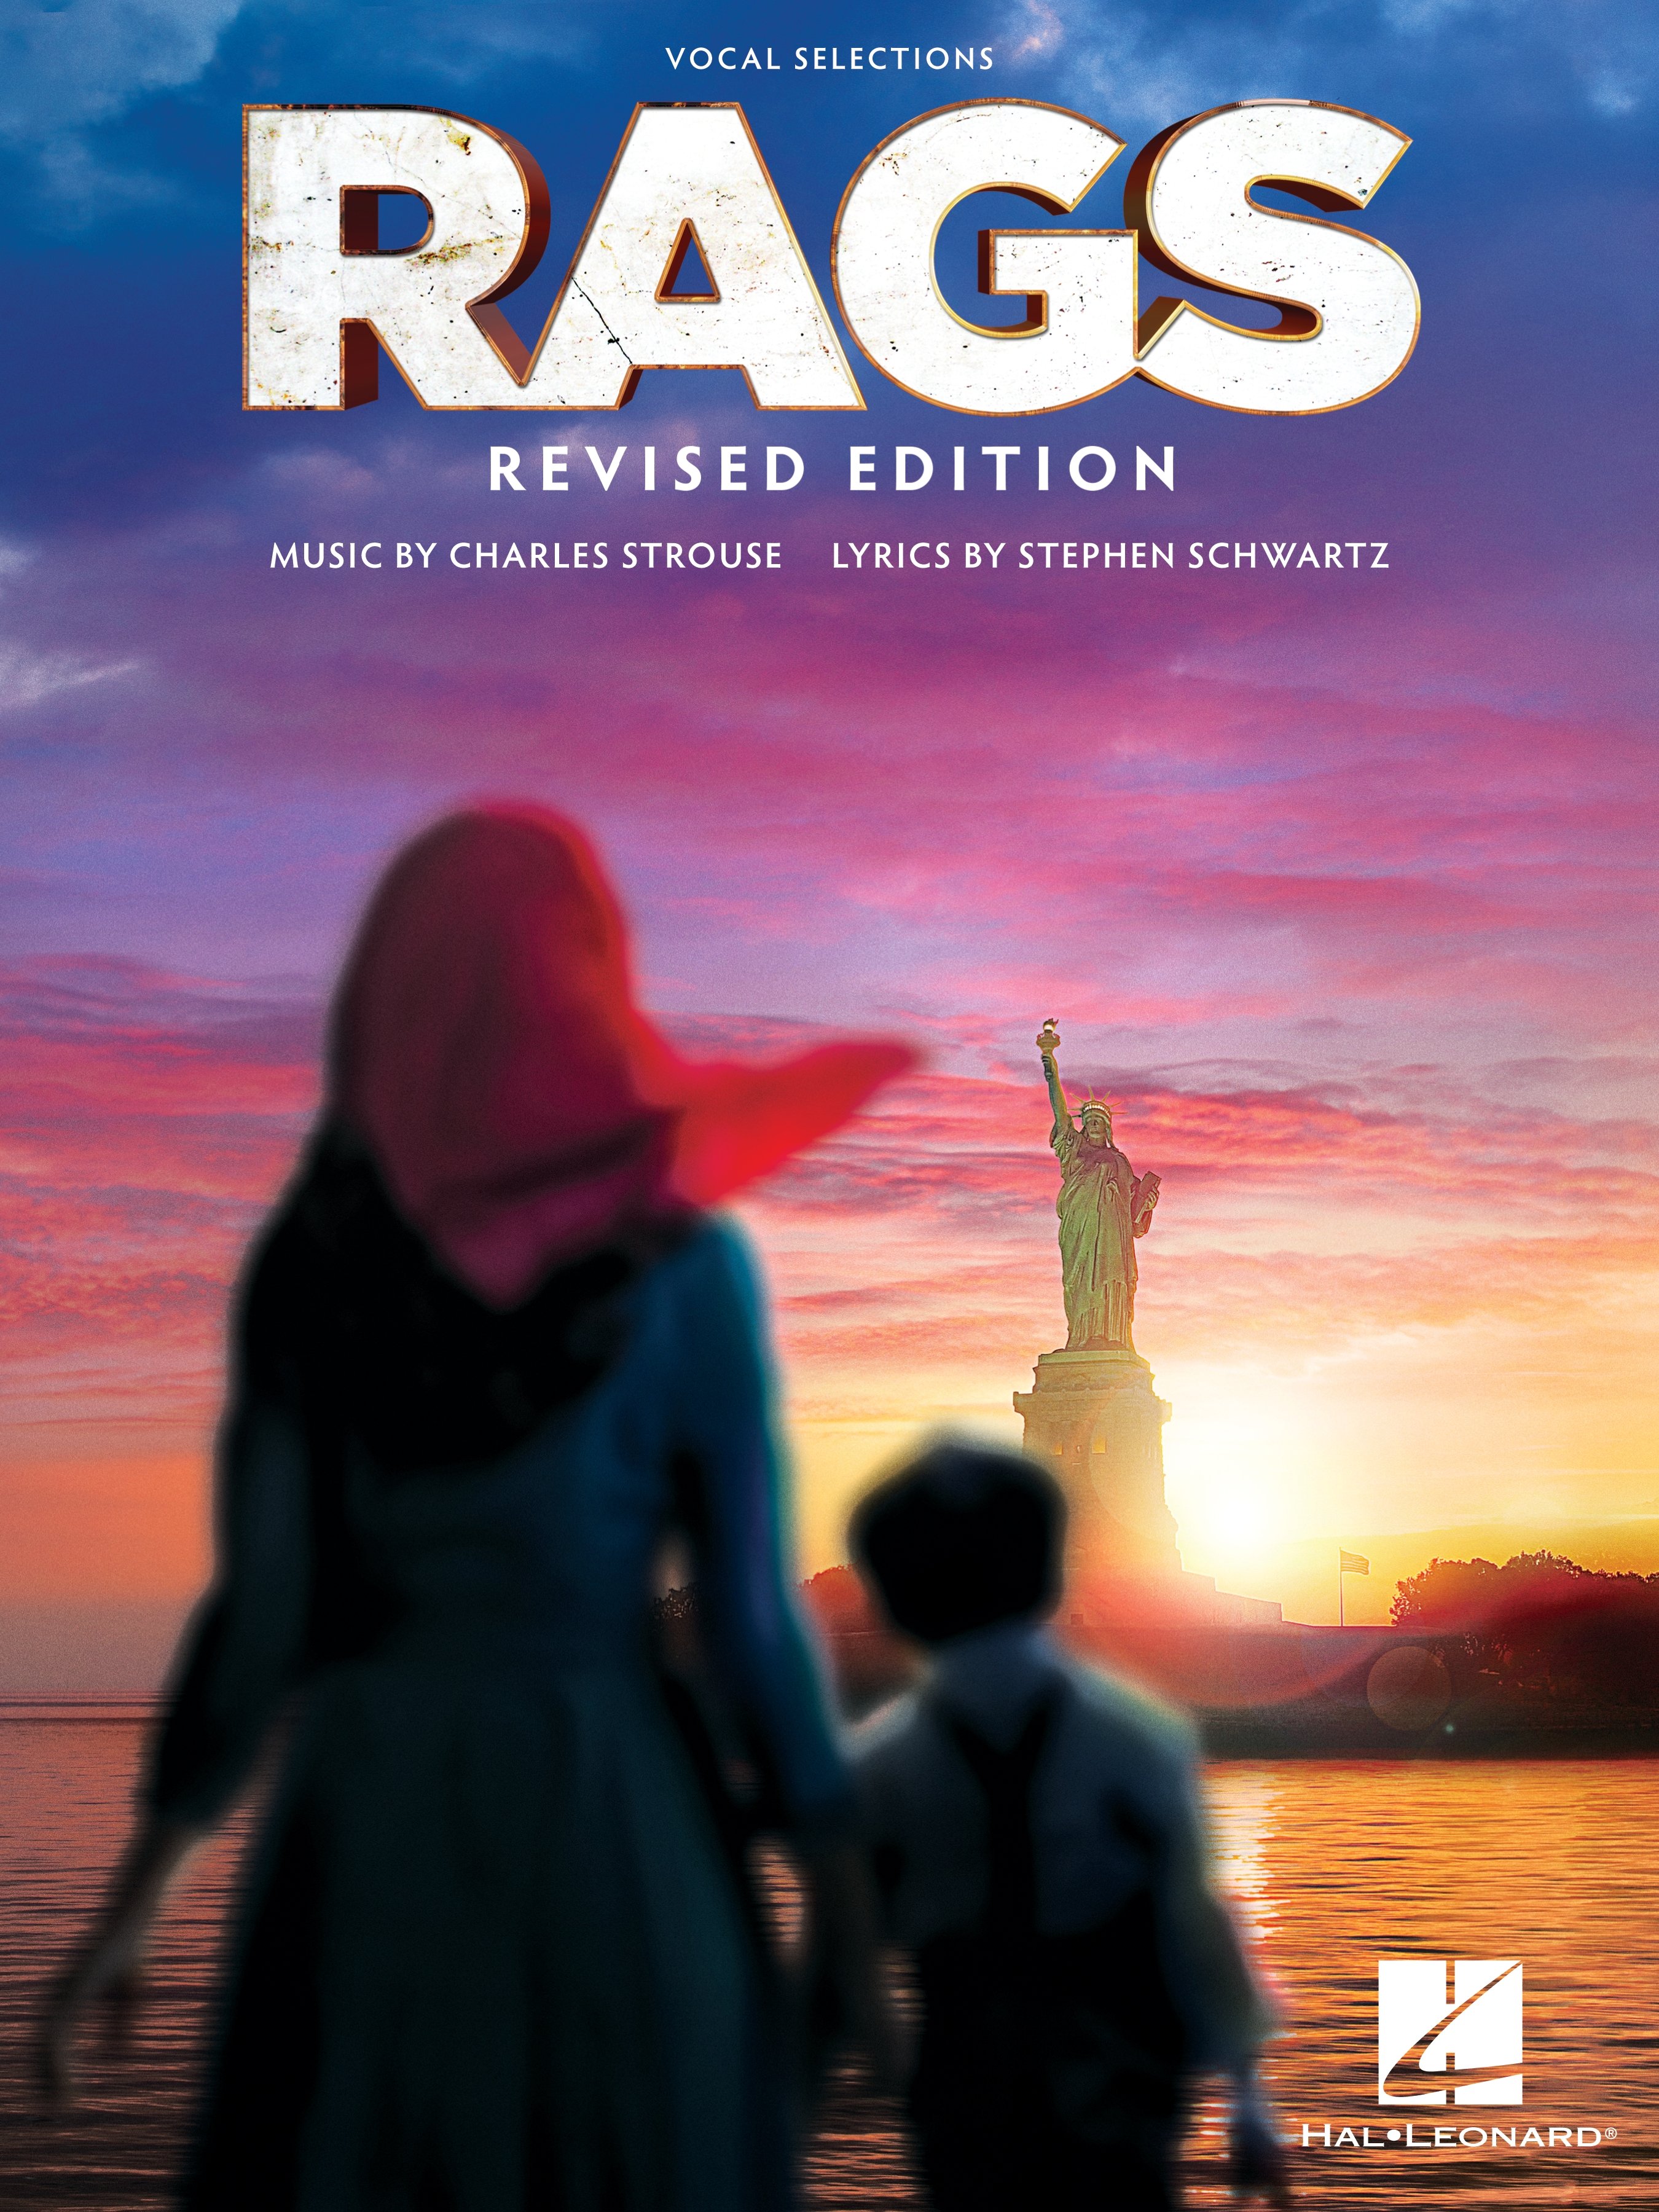 Rags library edition cover